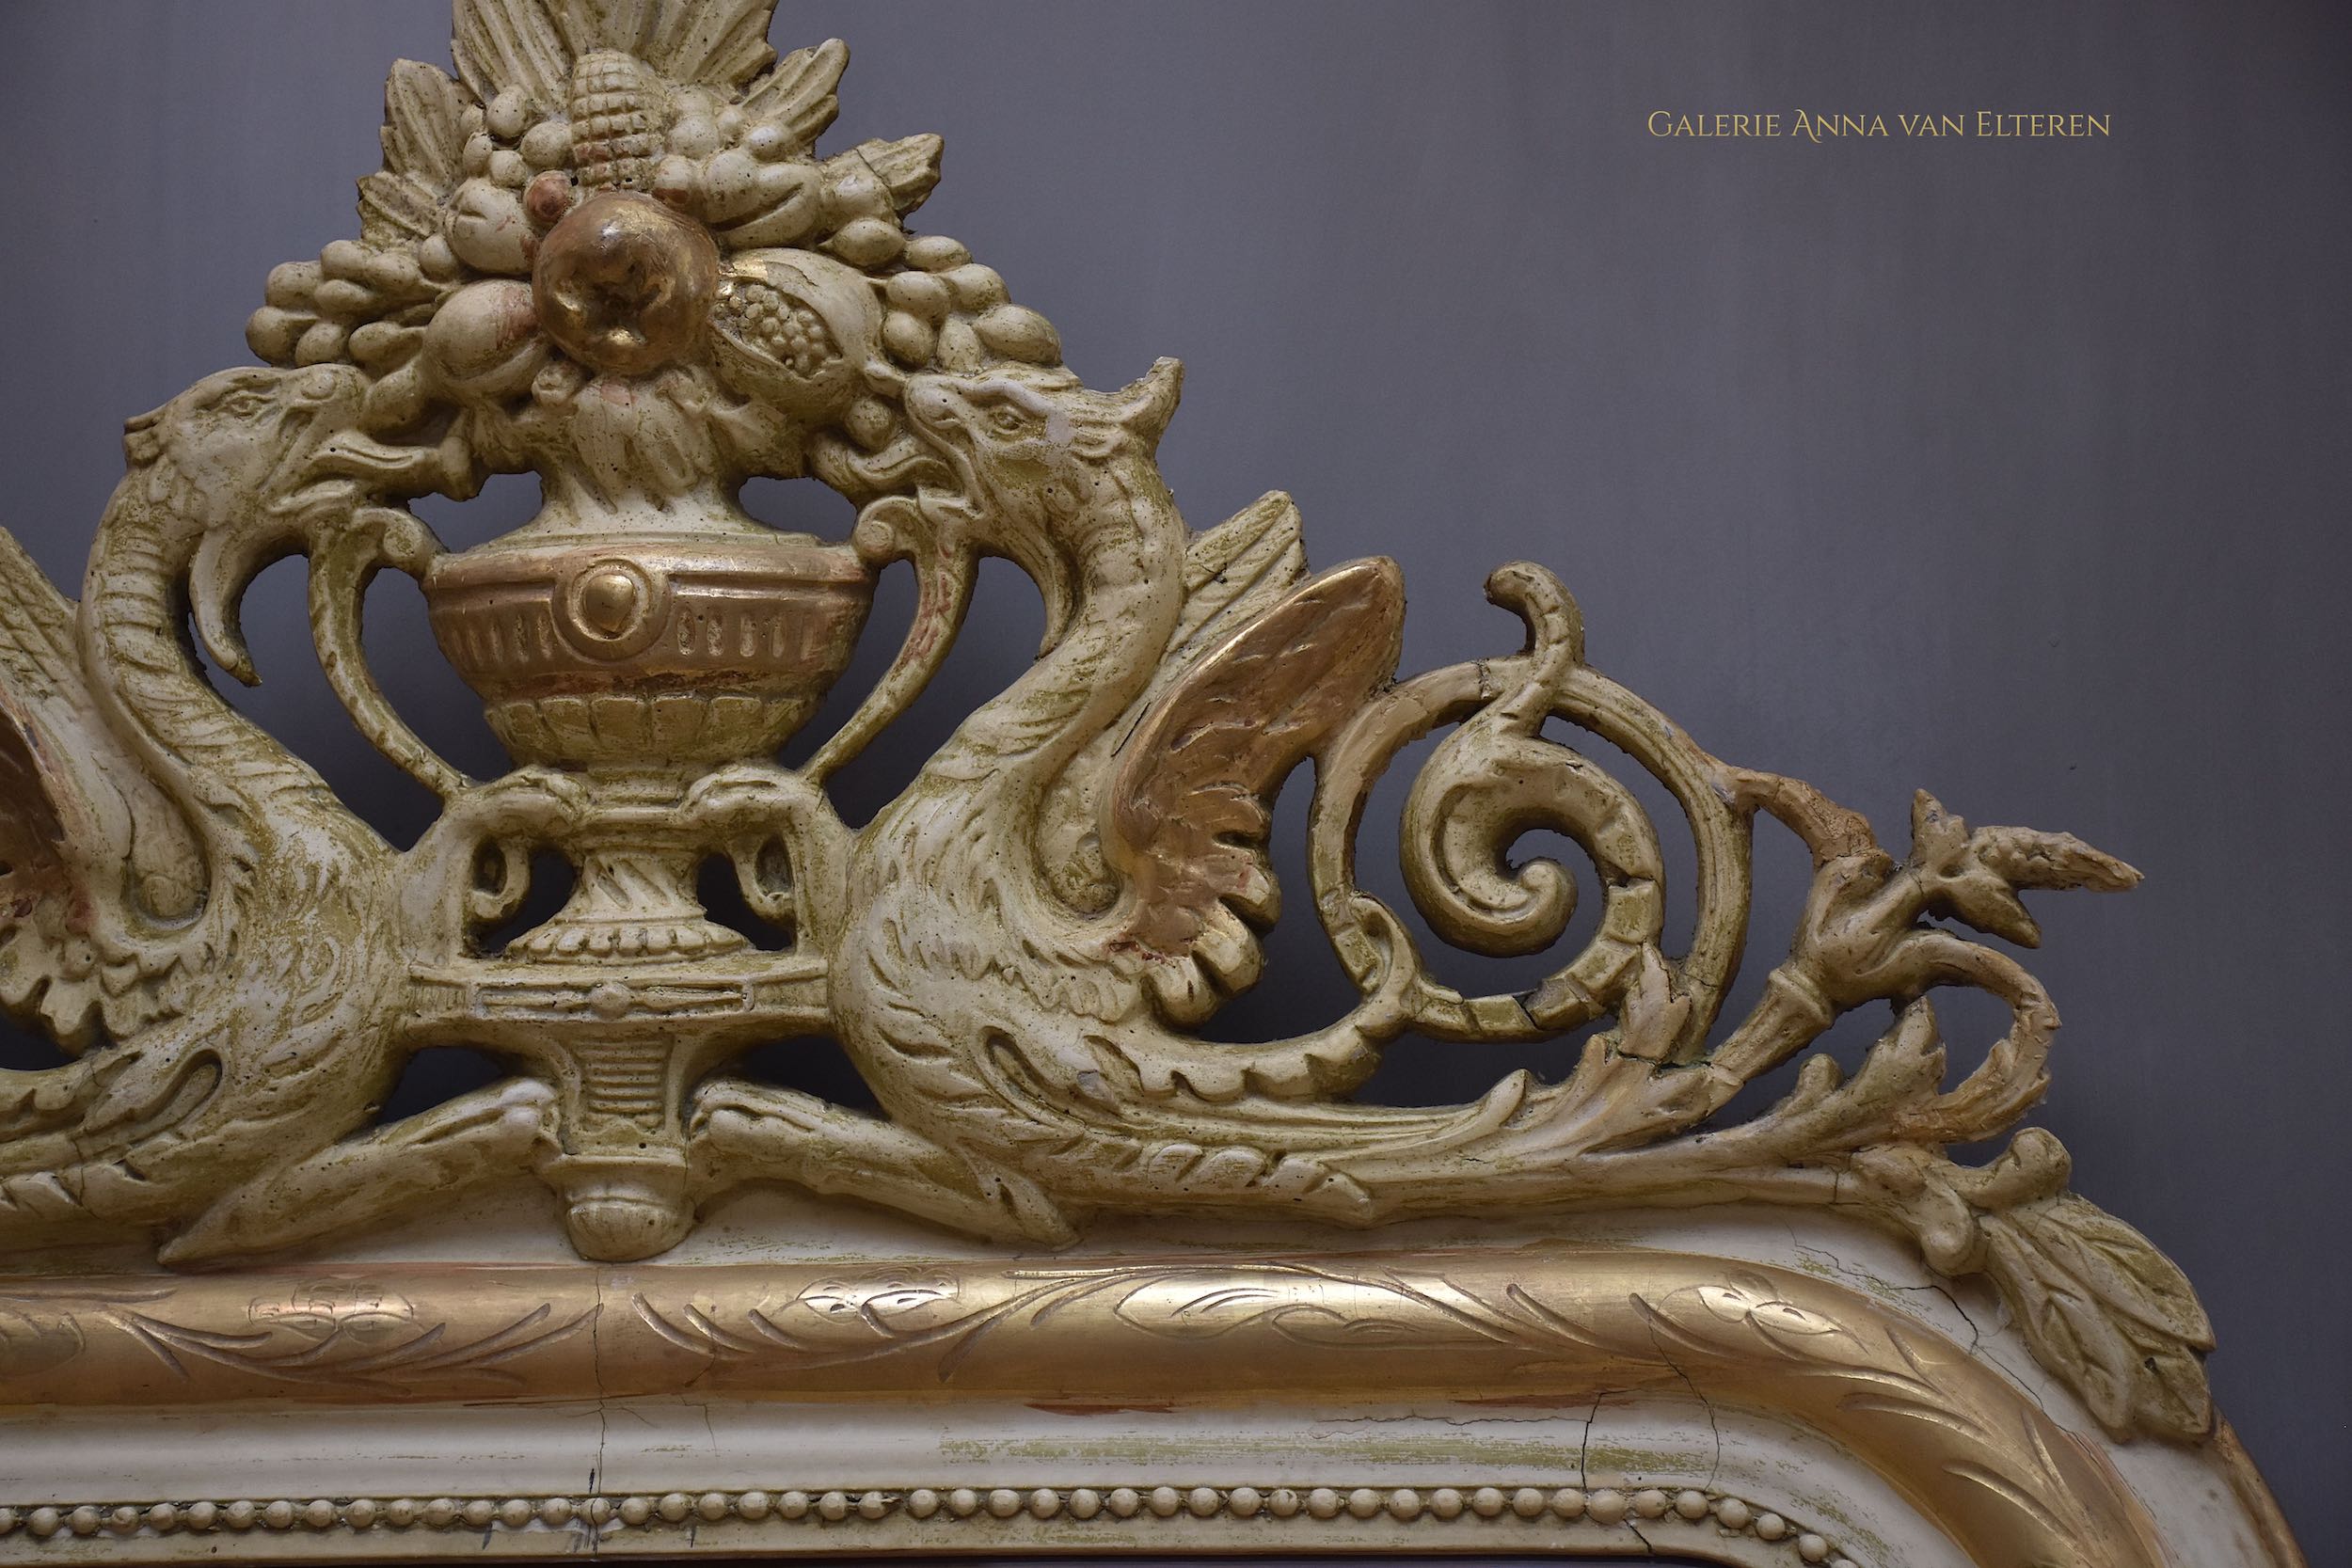 19th c. French mirror with an impressive crest